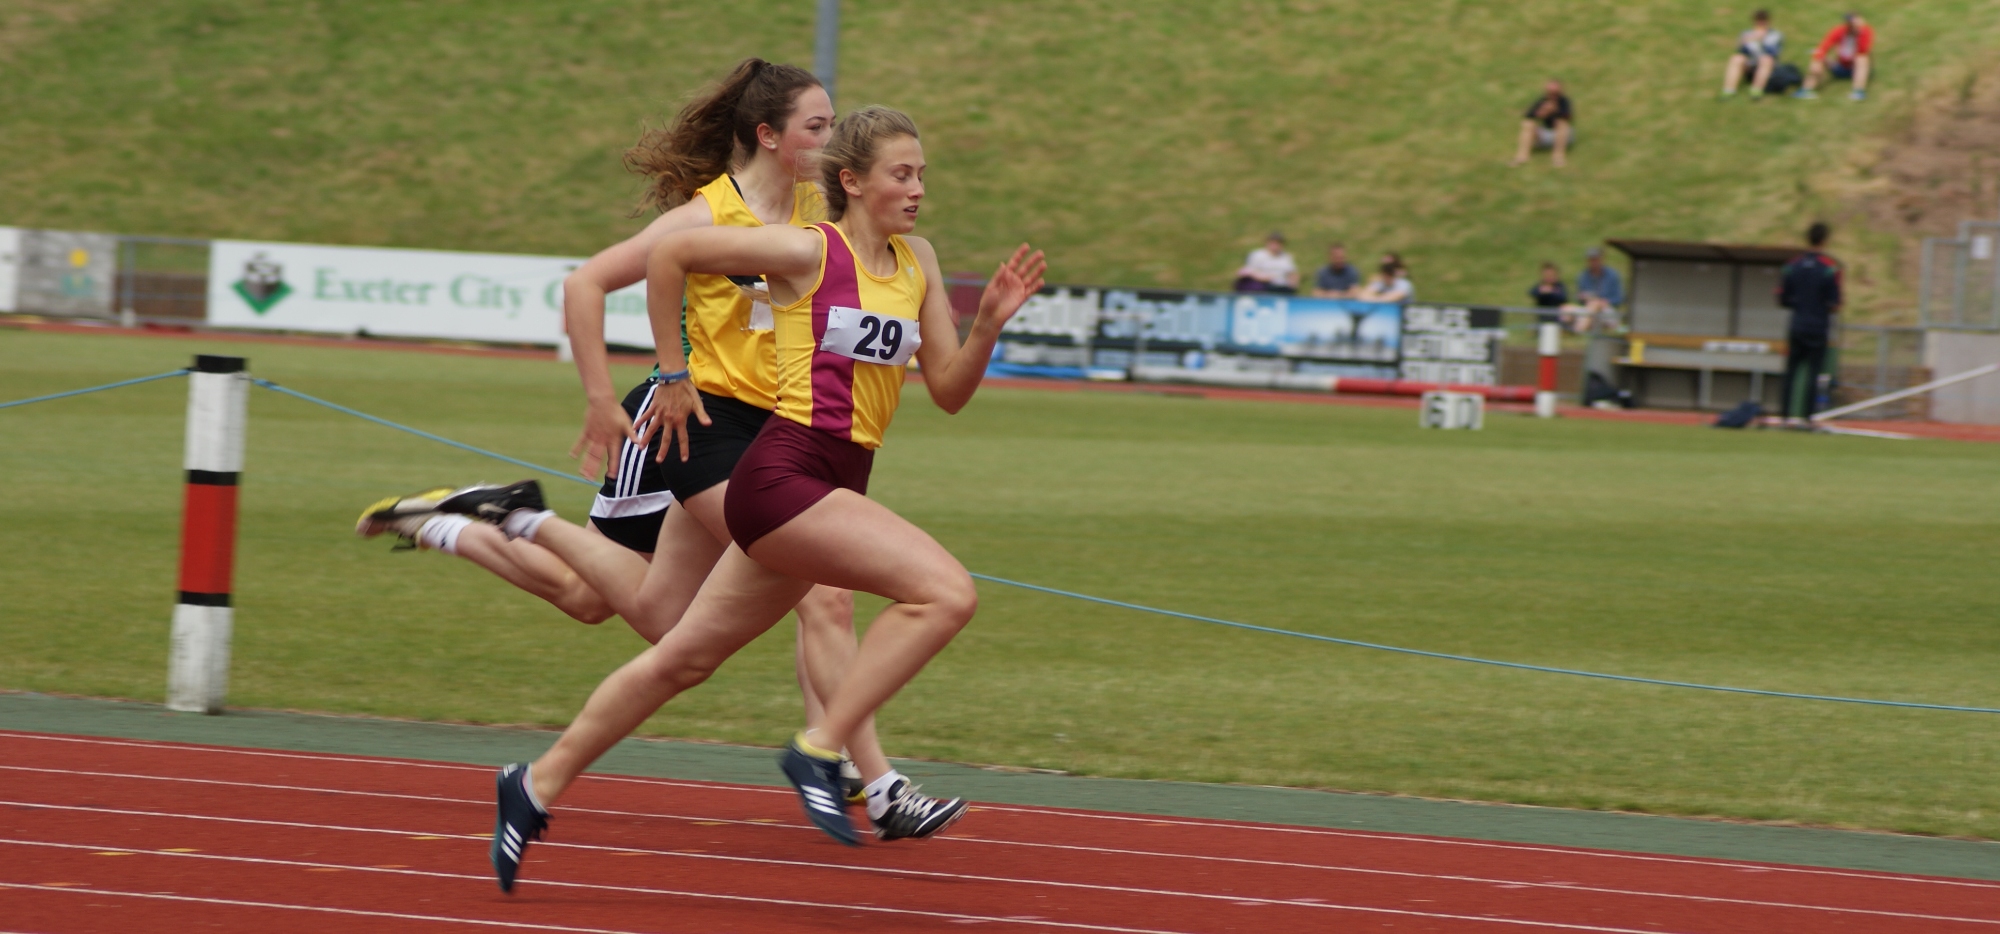 south west school championships exeter 100m june 2016